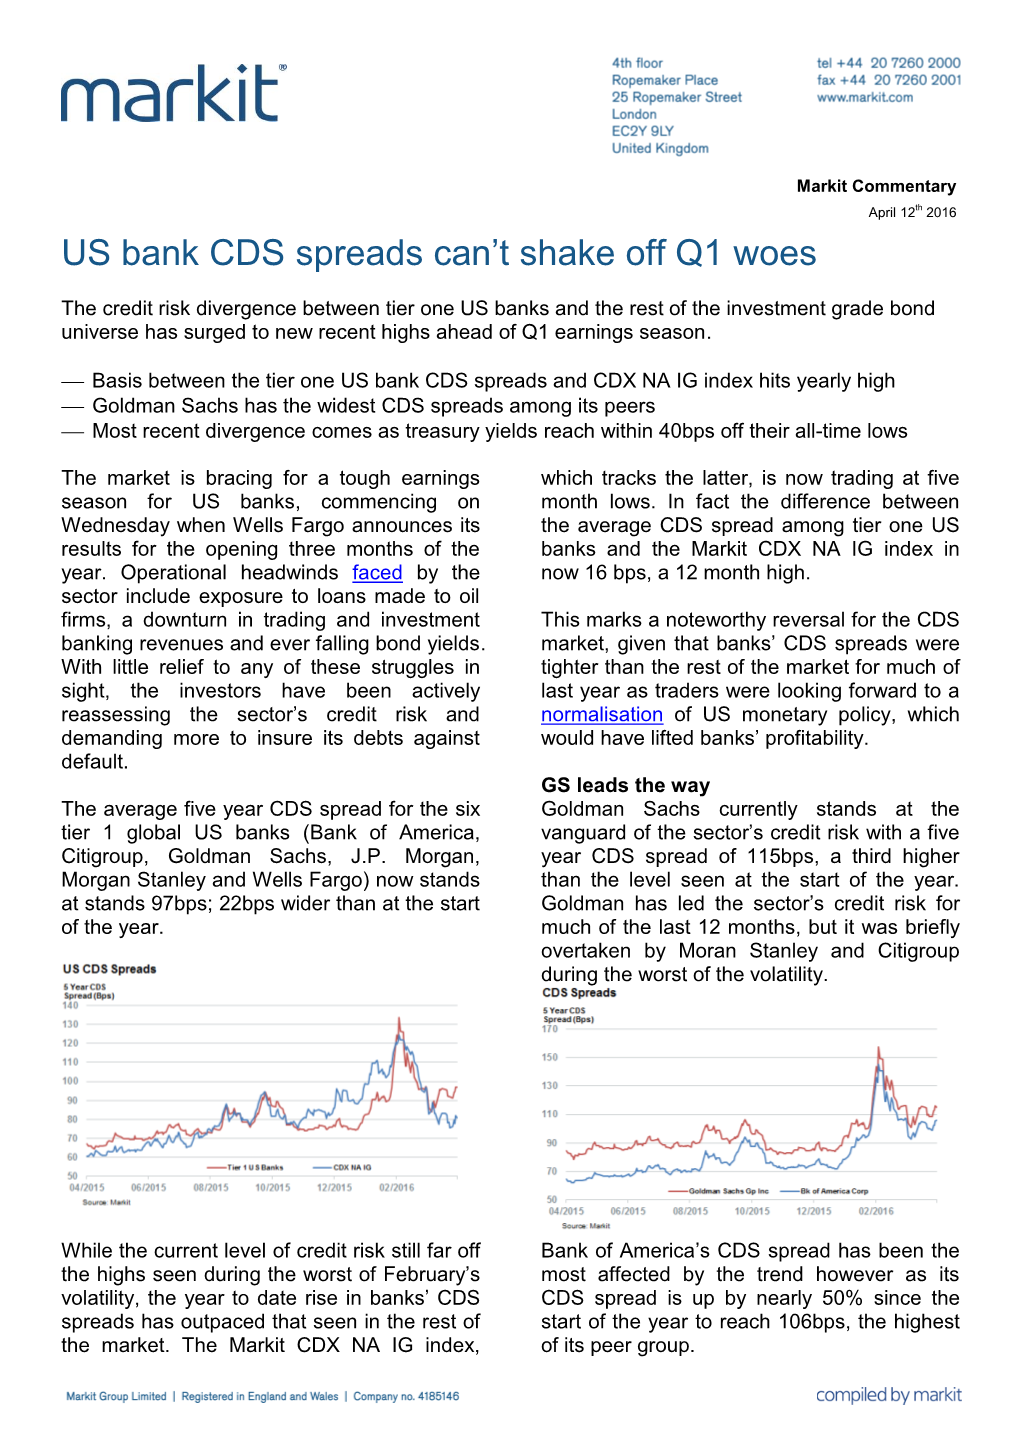 US Bank CDS Spreads Can't Shake Off Q1 Woes